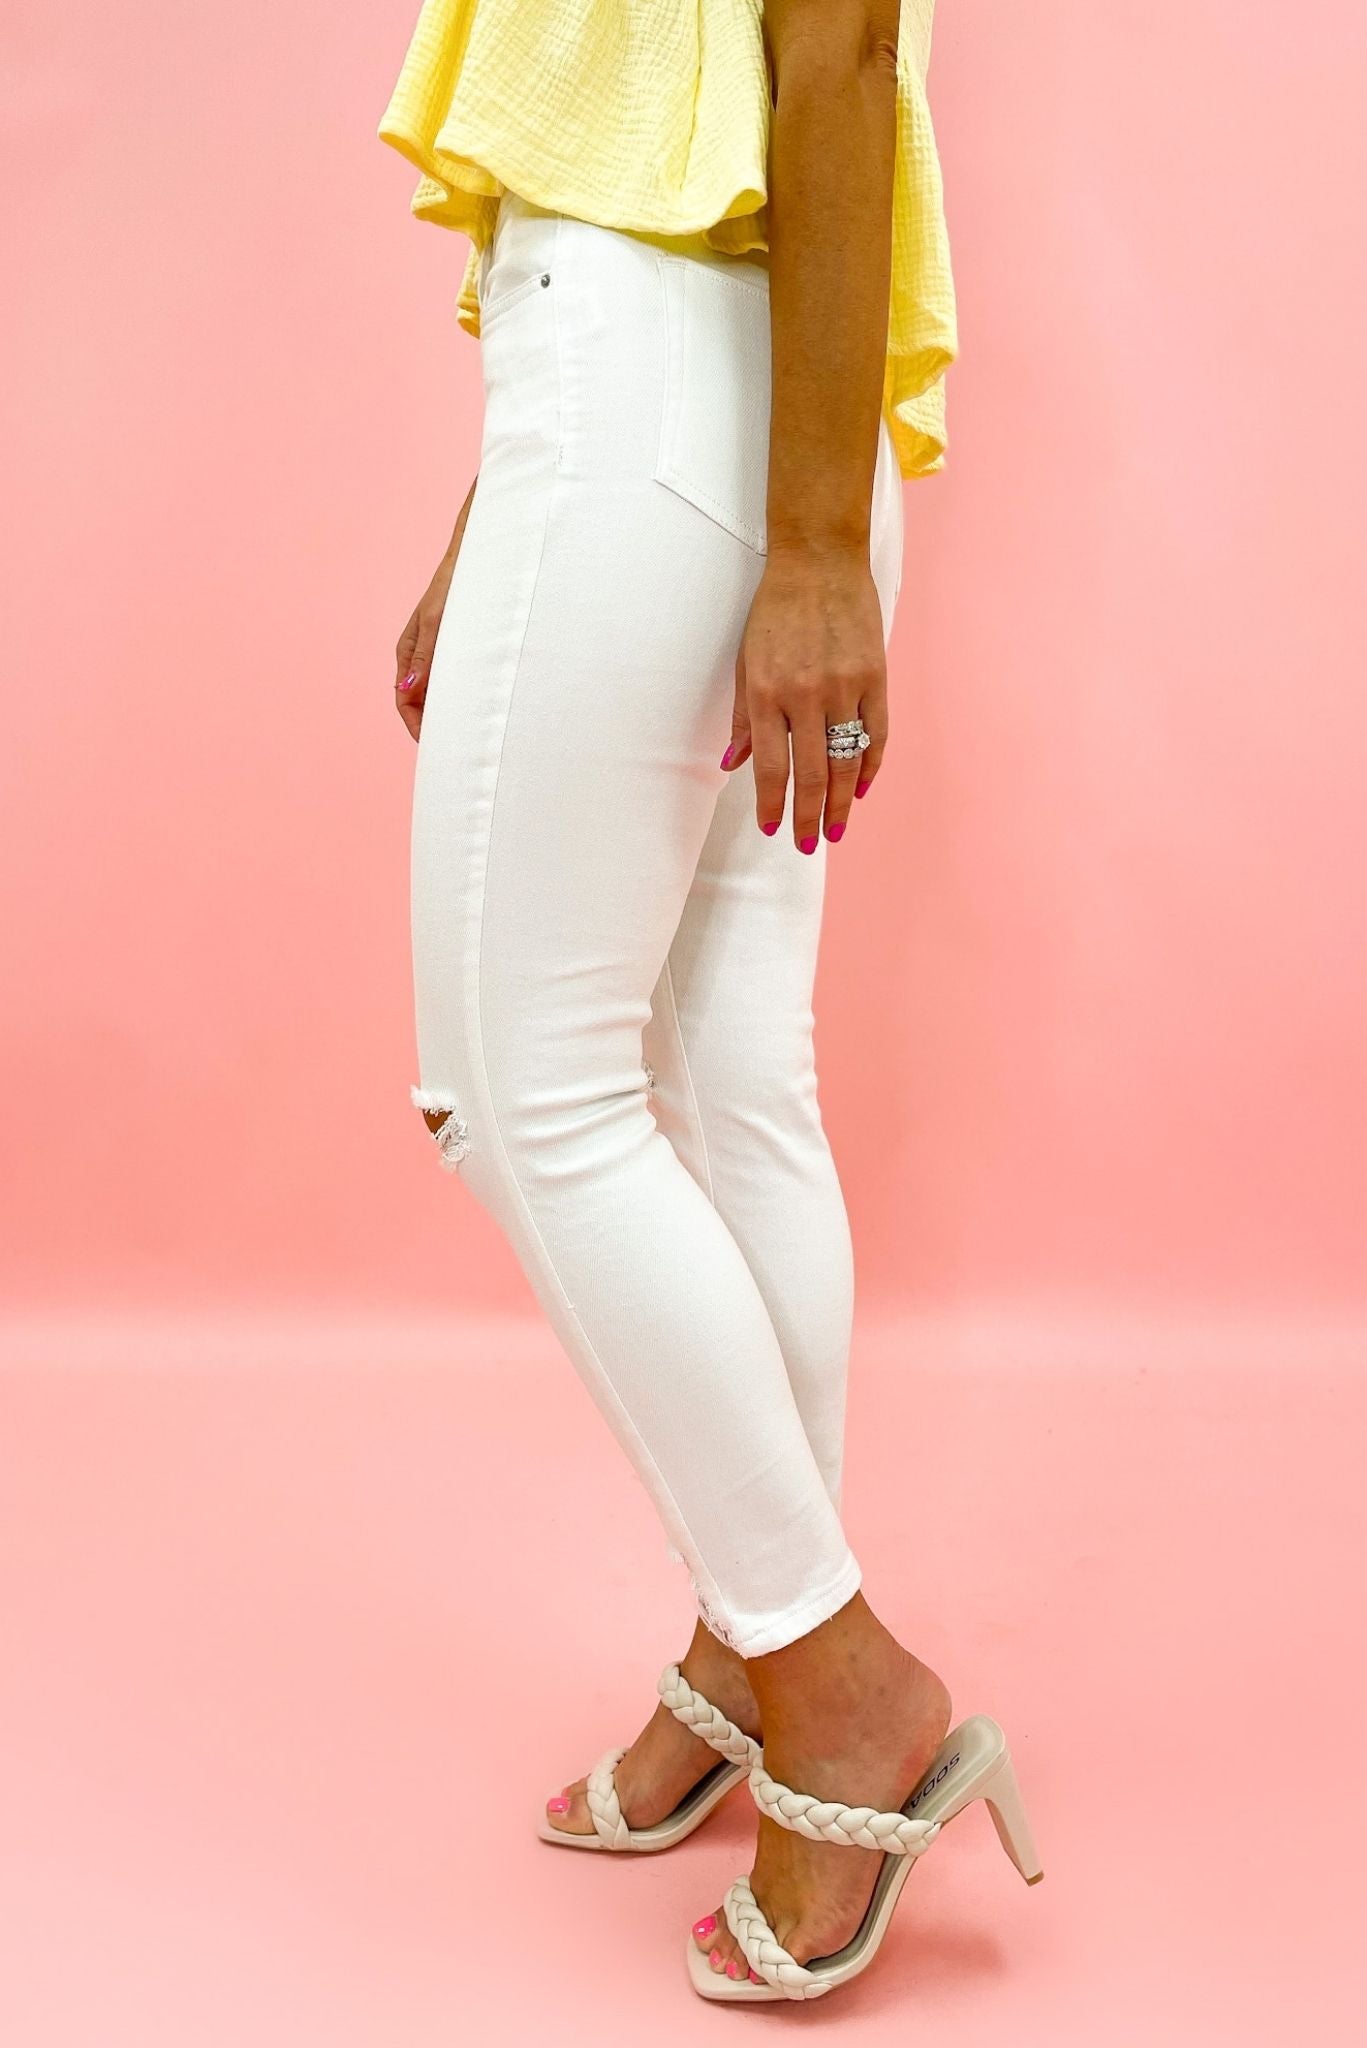 Load image into Gallery viewer, white distressed skinny jeans, yellow peplum muslin top, vacation vibes, summer style, shop style your senses by Mallory Fitzsimmons
